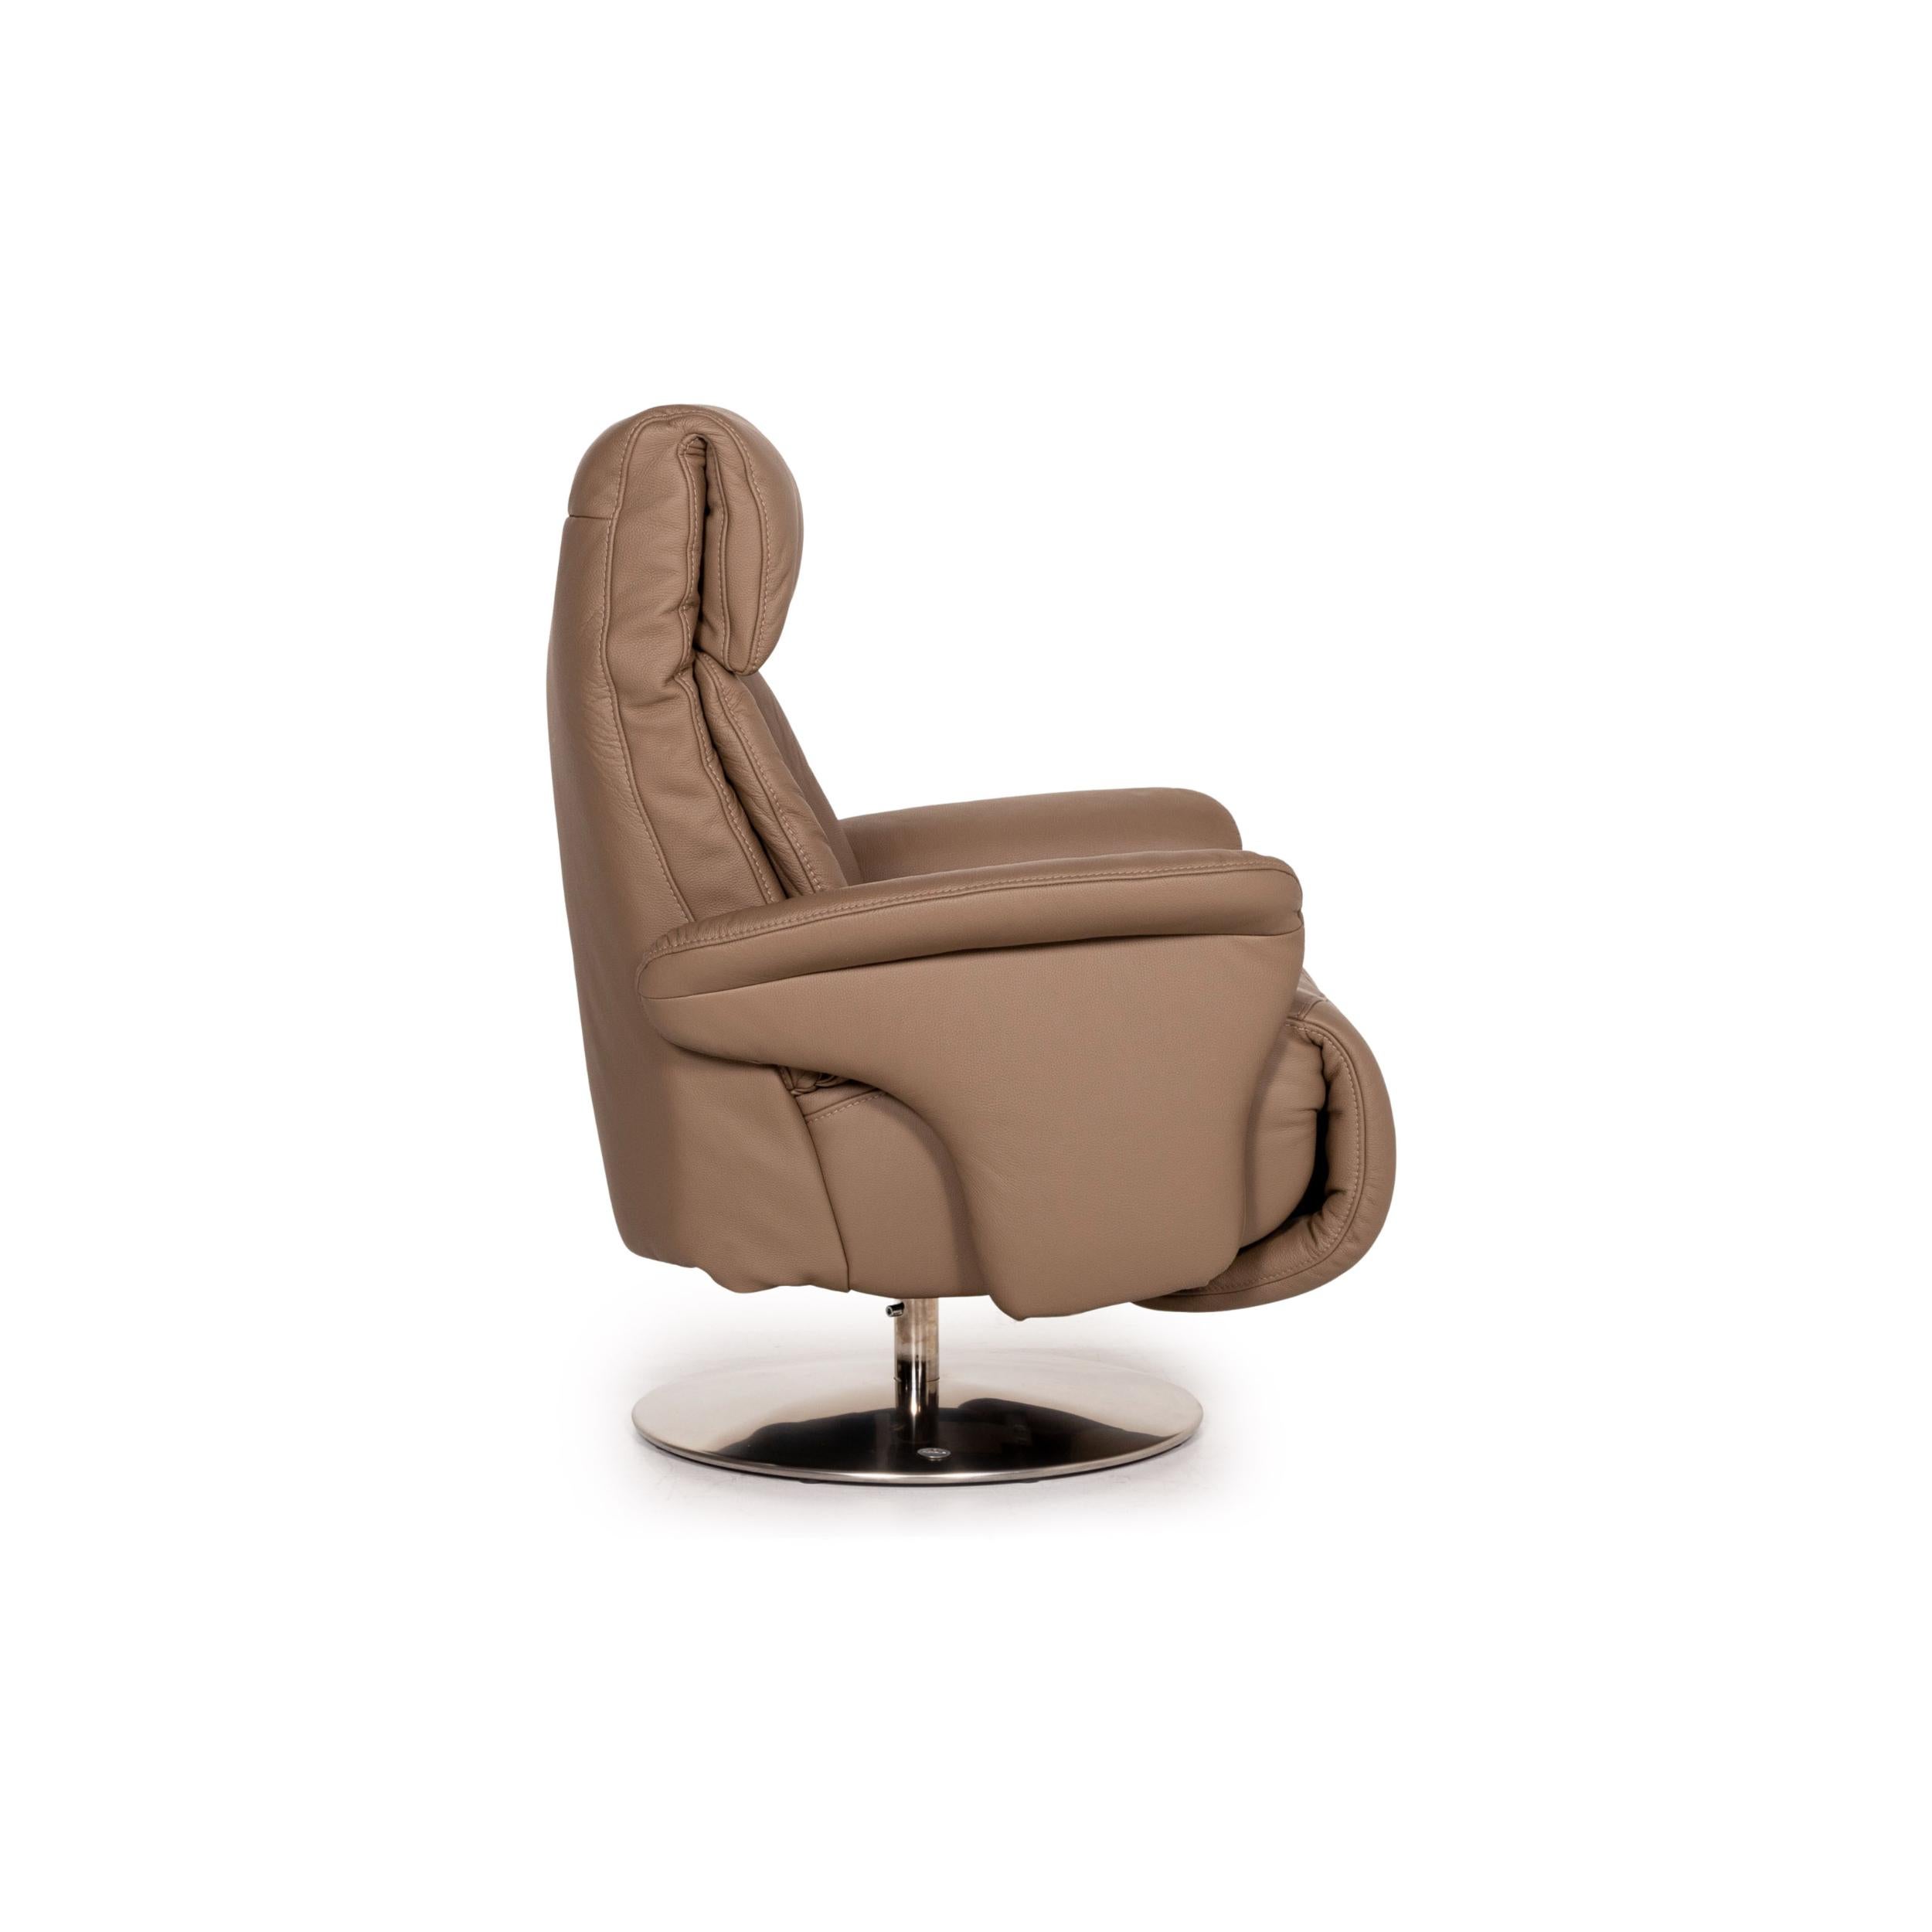 Himolla 7227 Leather Armchair Brown Relaxation Function Function Relaxation For Sale 4